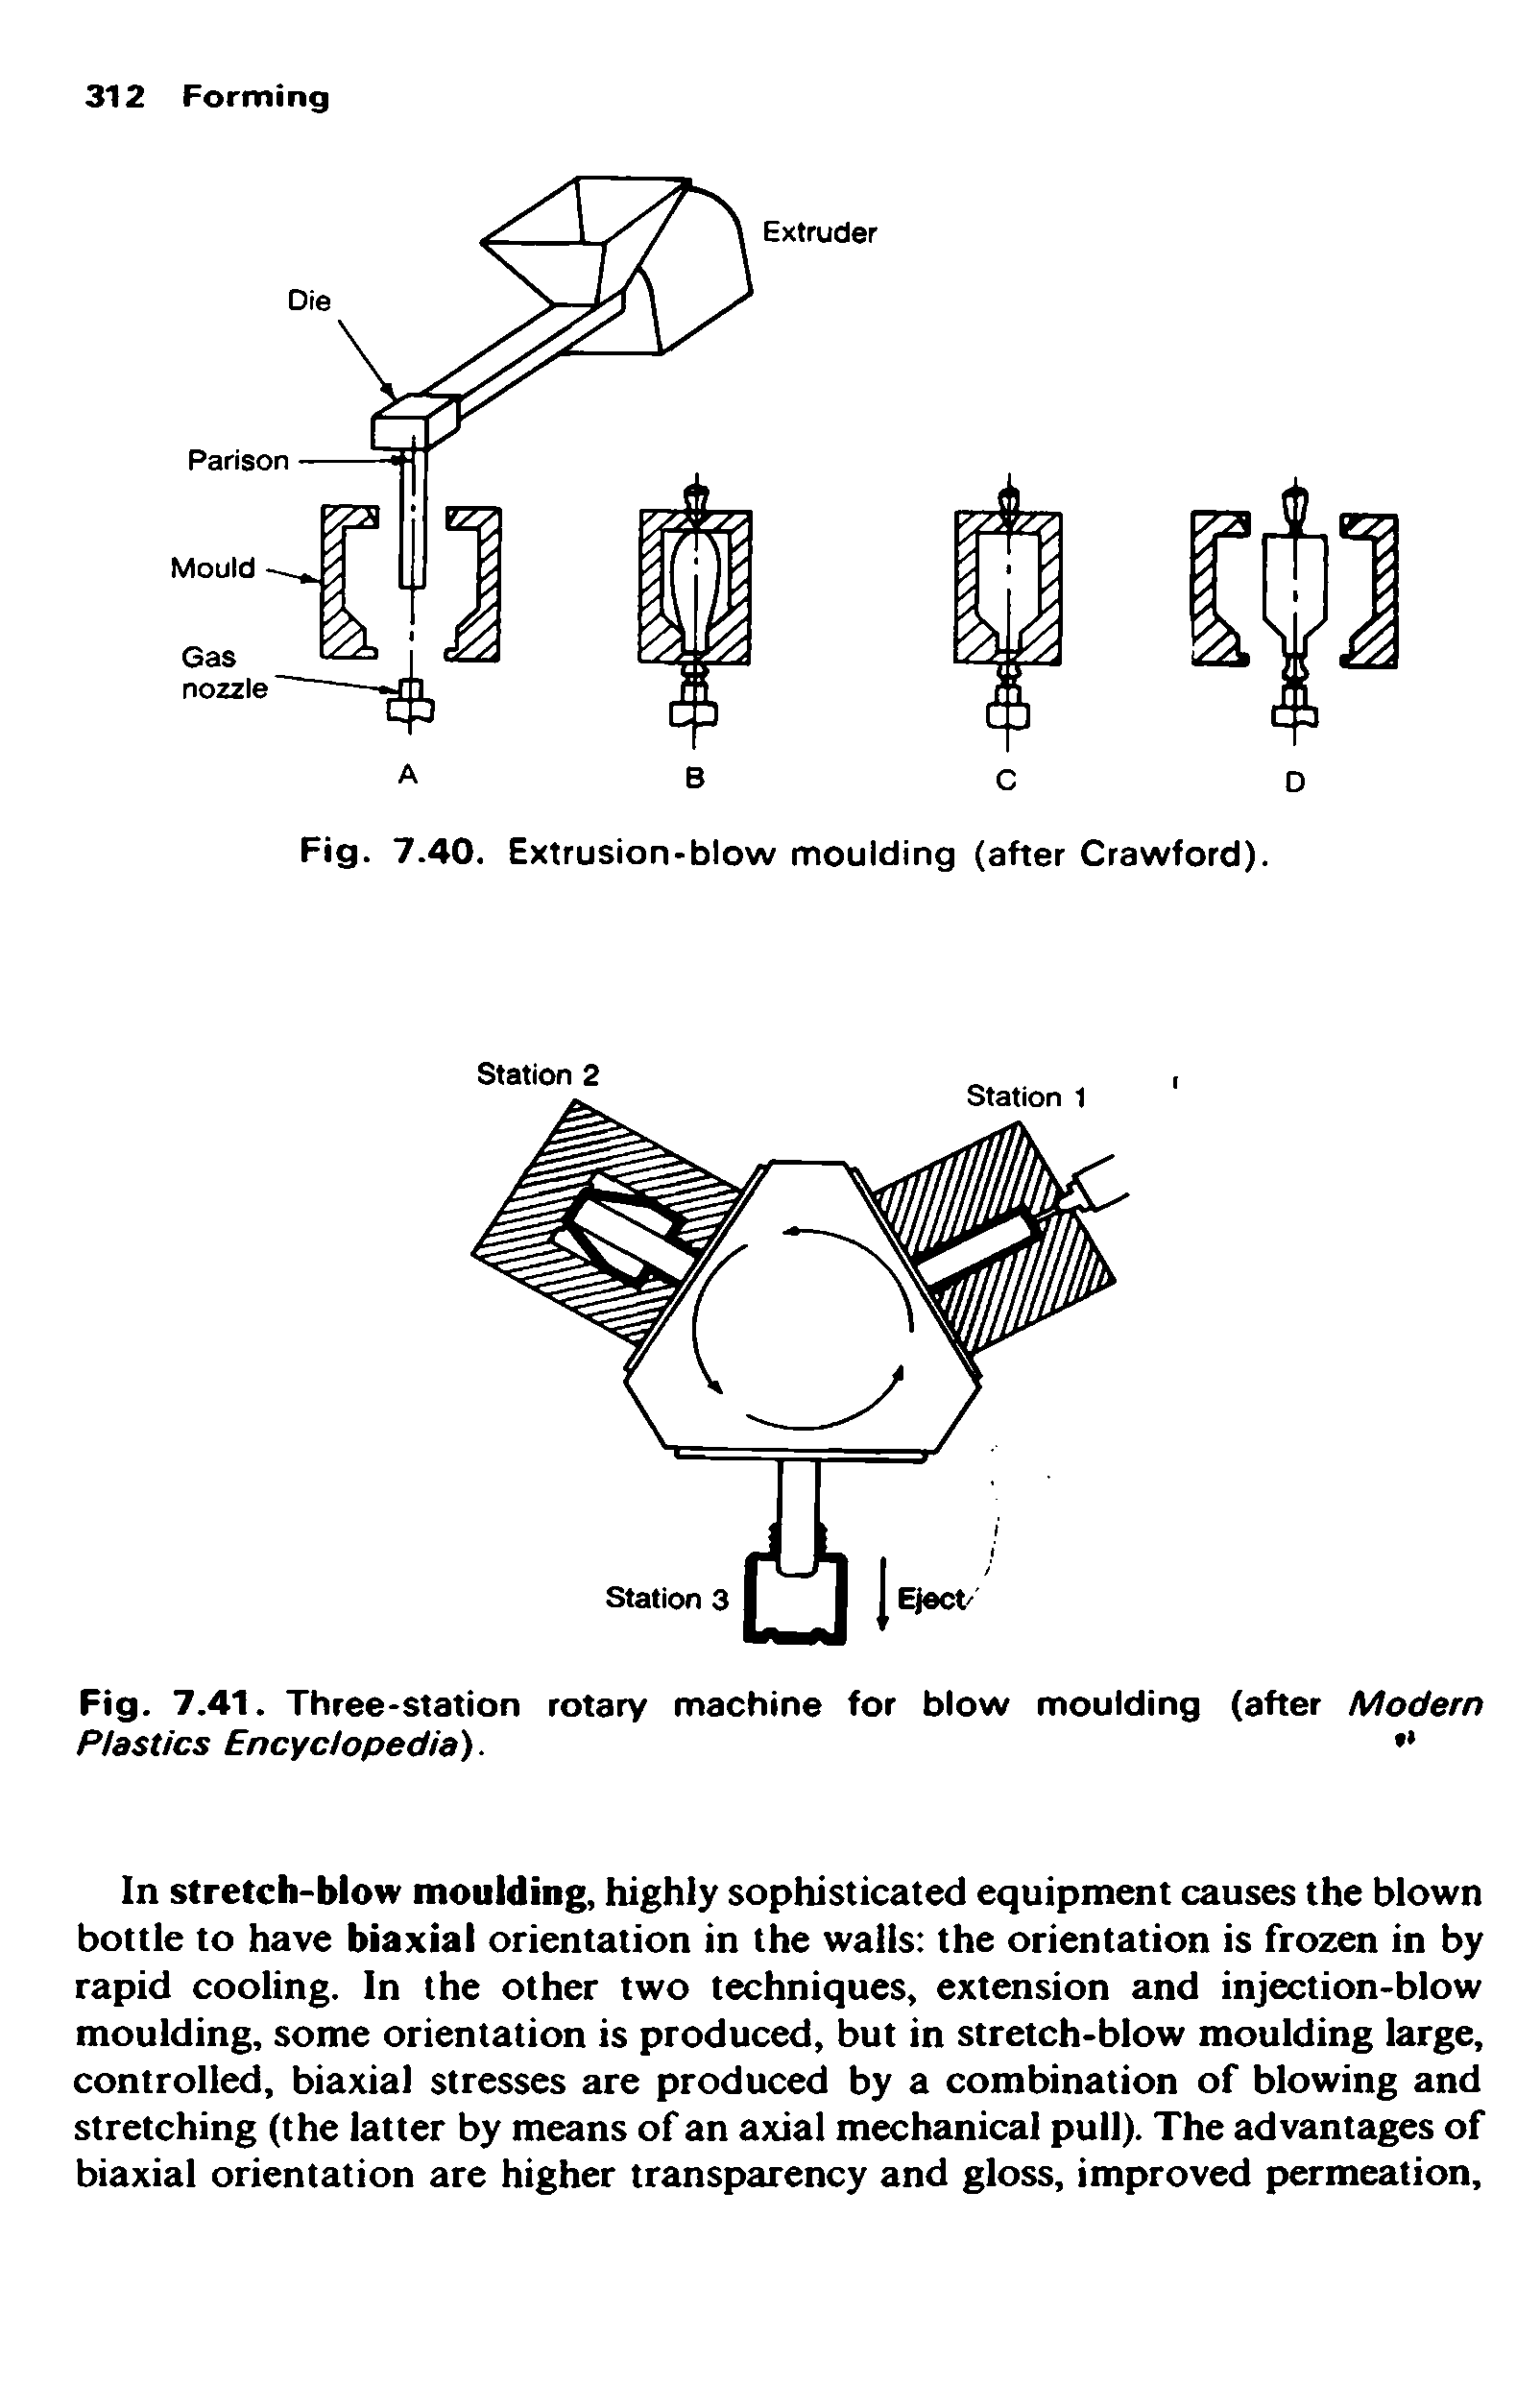 Fig. 7.41. Three-Station rotary machine for blow moulding (after Modern Plastics Encyclopedia). ...